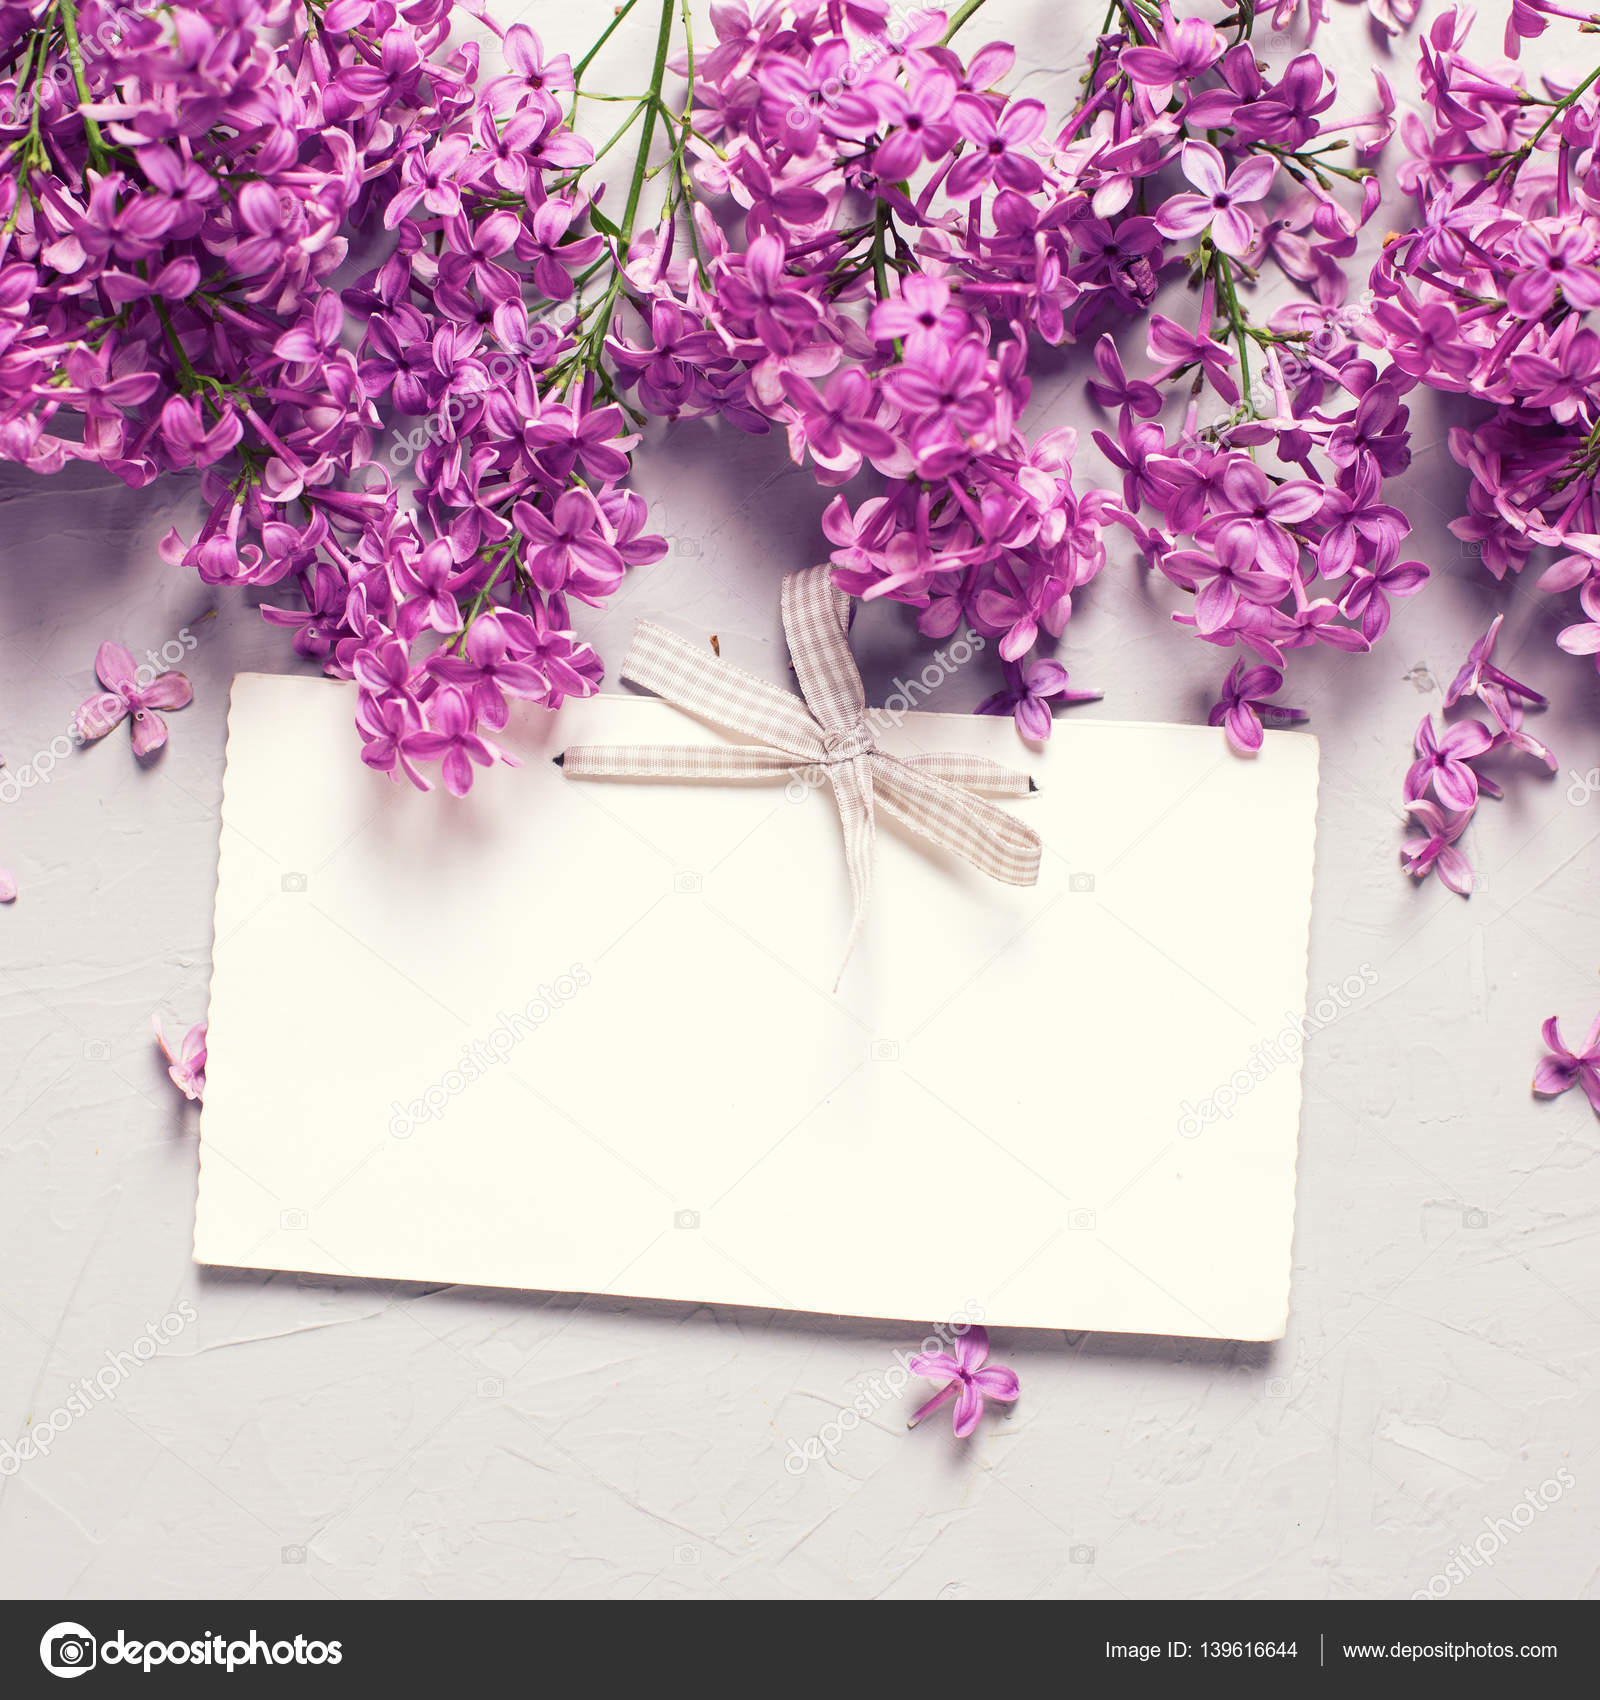 Fresh Flowers and empty tag — Stock Photo © daffodil #139616644